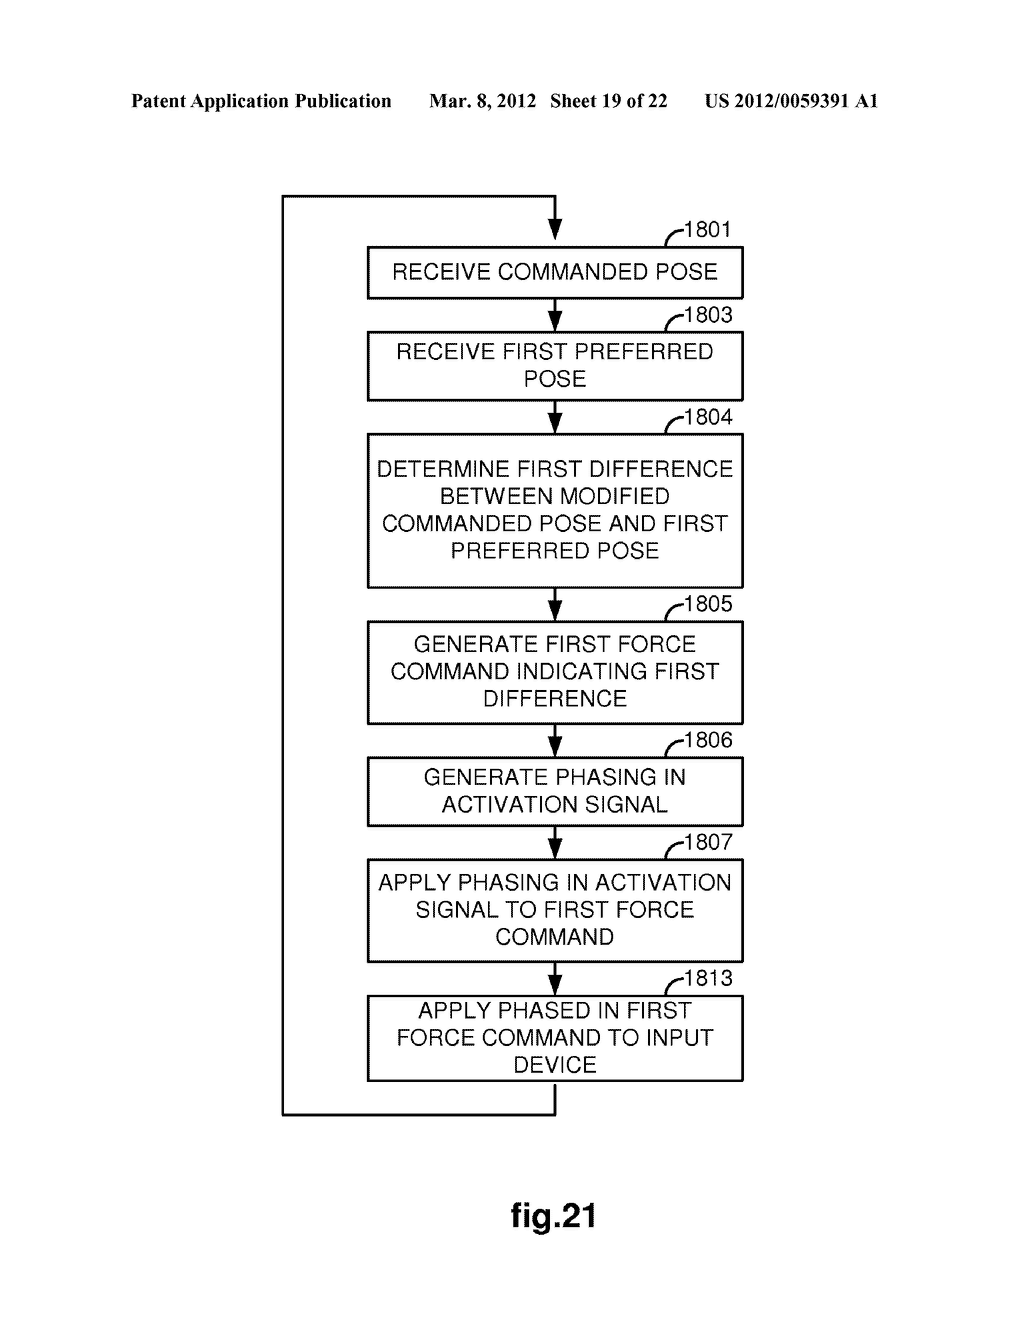 APPLICATION OF FORCE FEEDBACK ON AN INPUT DEVICE TO URGE ITS OPERATOR TO     COMMAND AN ARTICULATED INSTRUMENT TO A PREFERRED POSE - diagram, schematic, and image 20